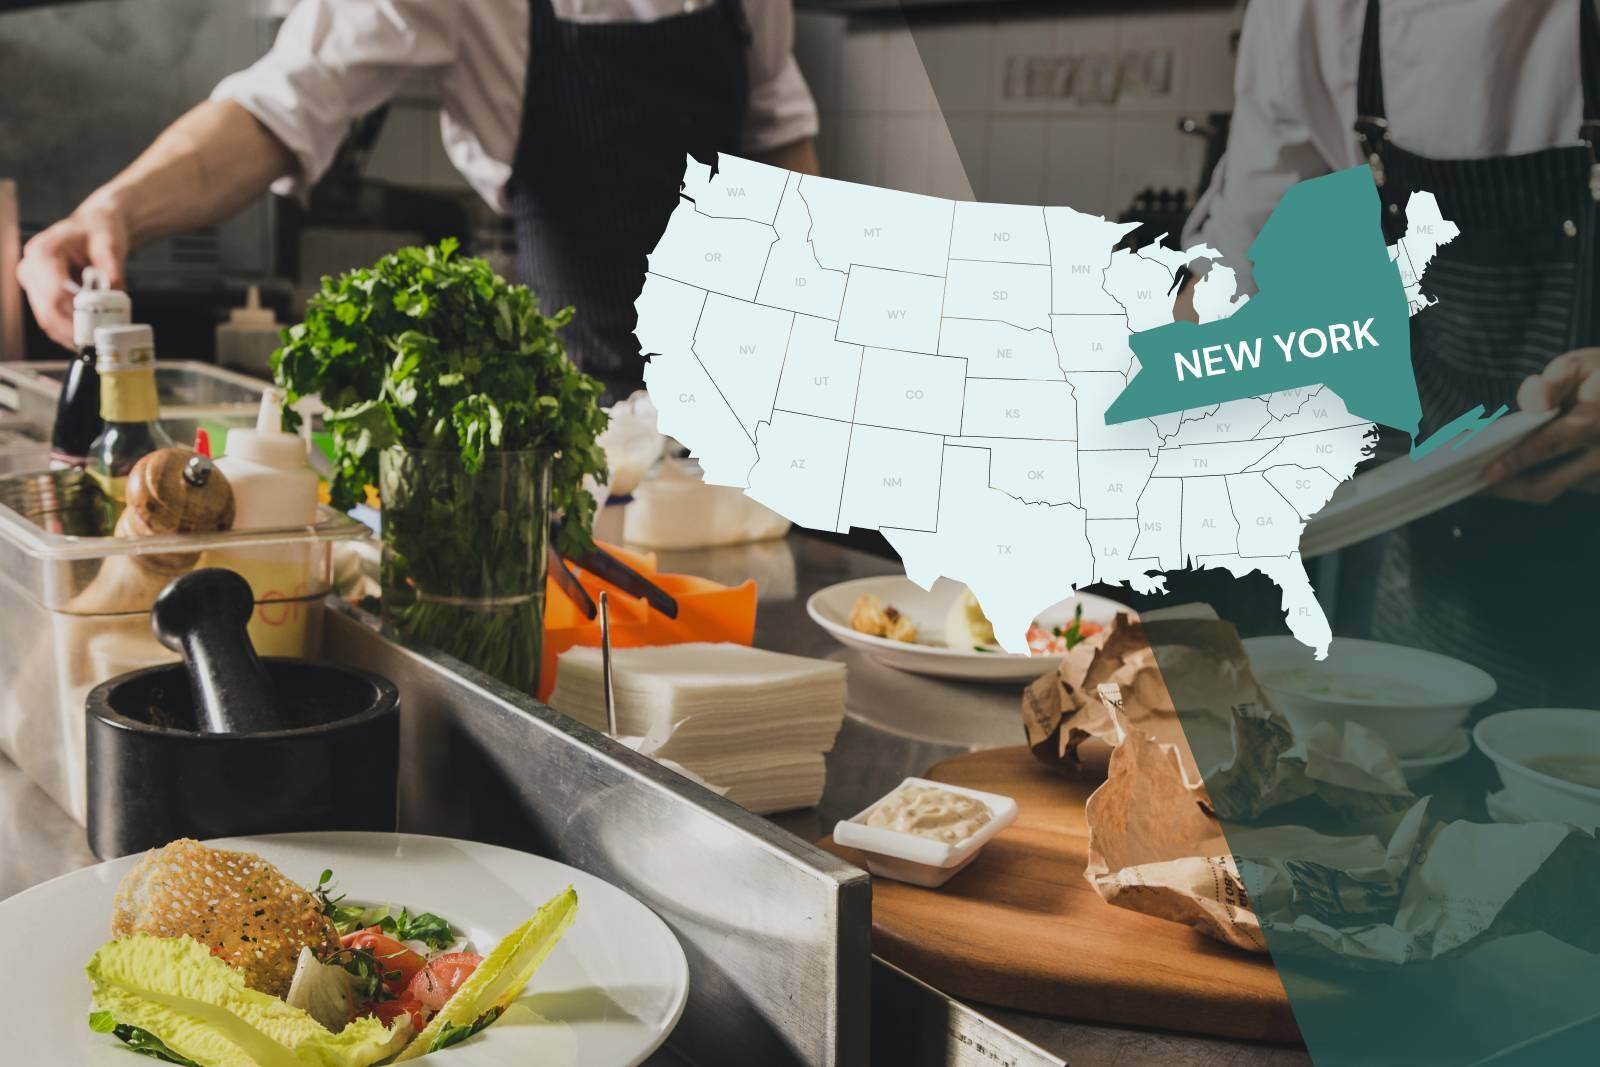 Graphic of a U.S. map that highlights New York State overlayed on a kitchen counter